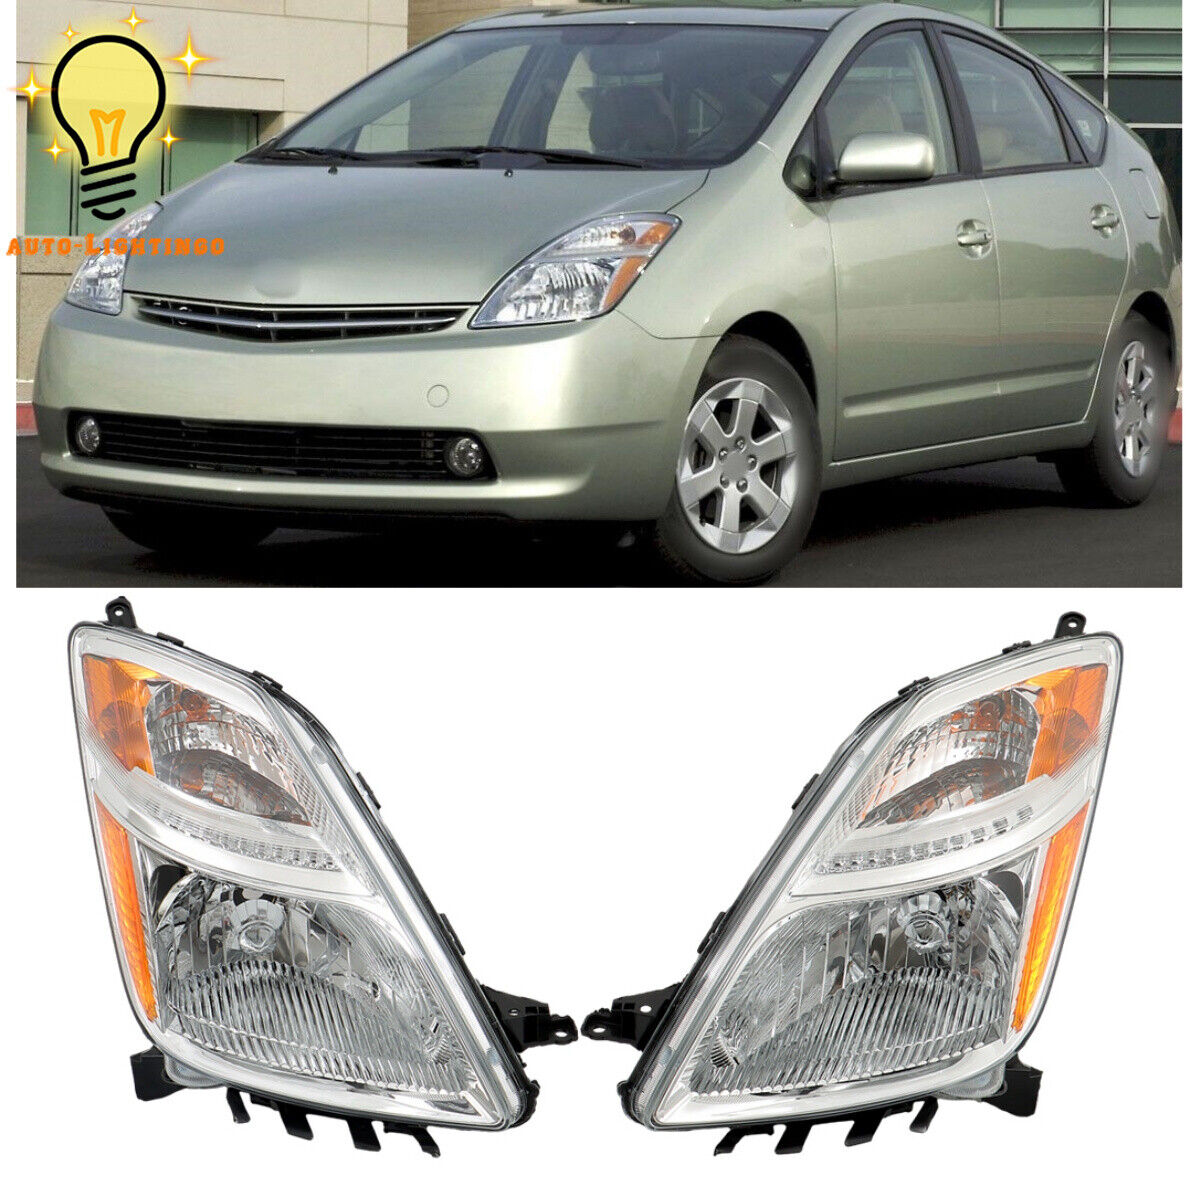 For 2006 2007 2008 2009 Toyota Prius Halogen Headlight Headlamps Right&Left Side